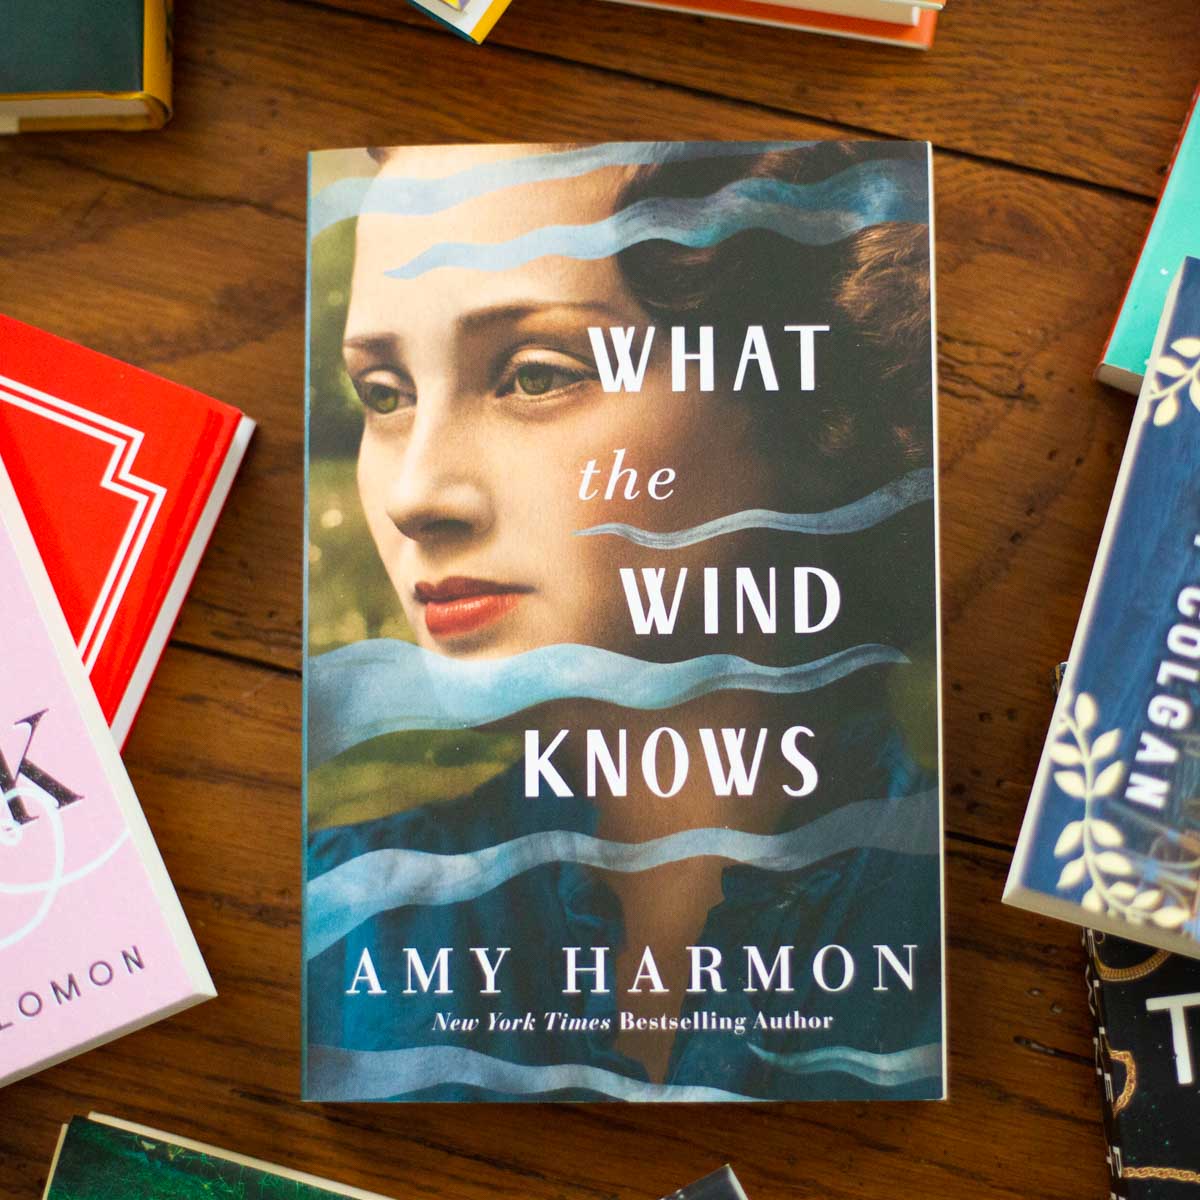 A copy of the book What the Wind Knows is on the table.